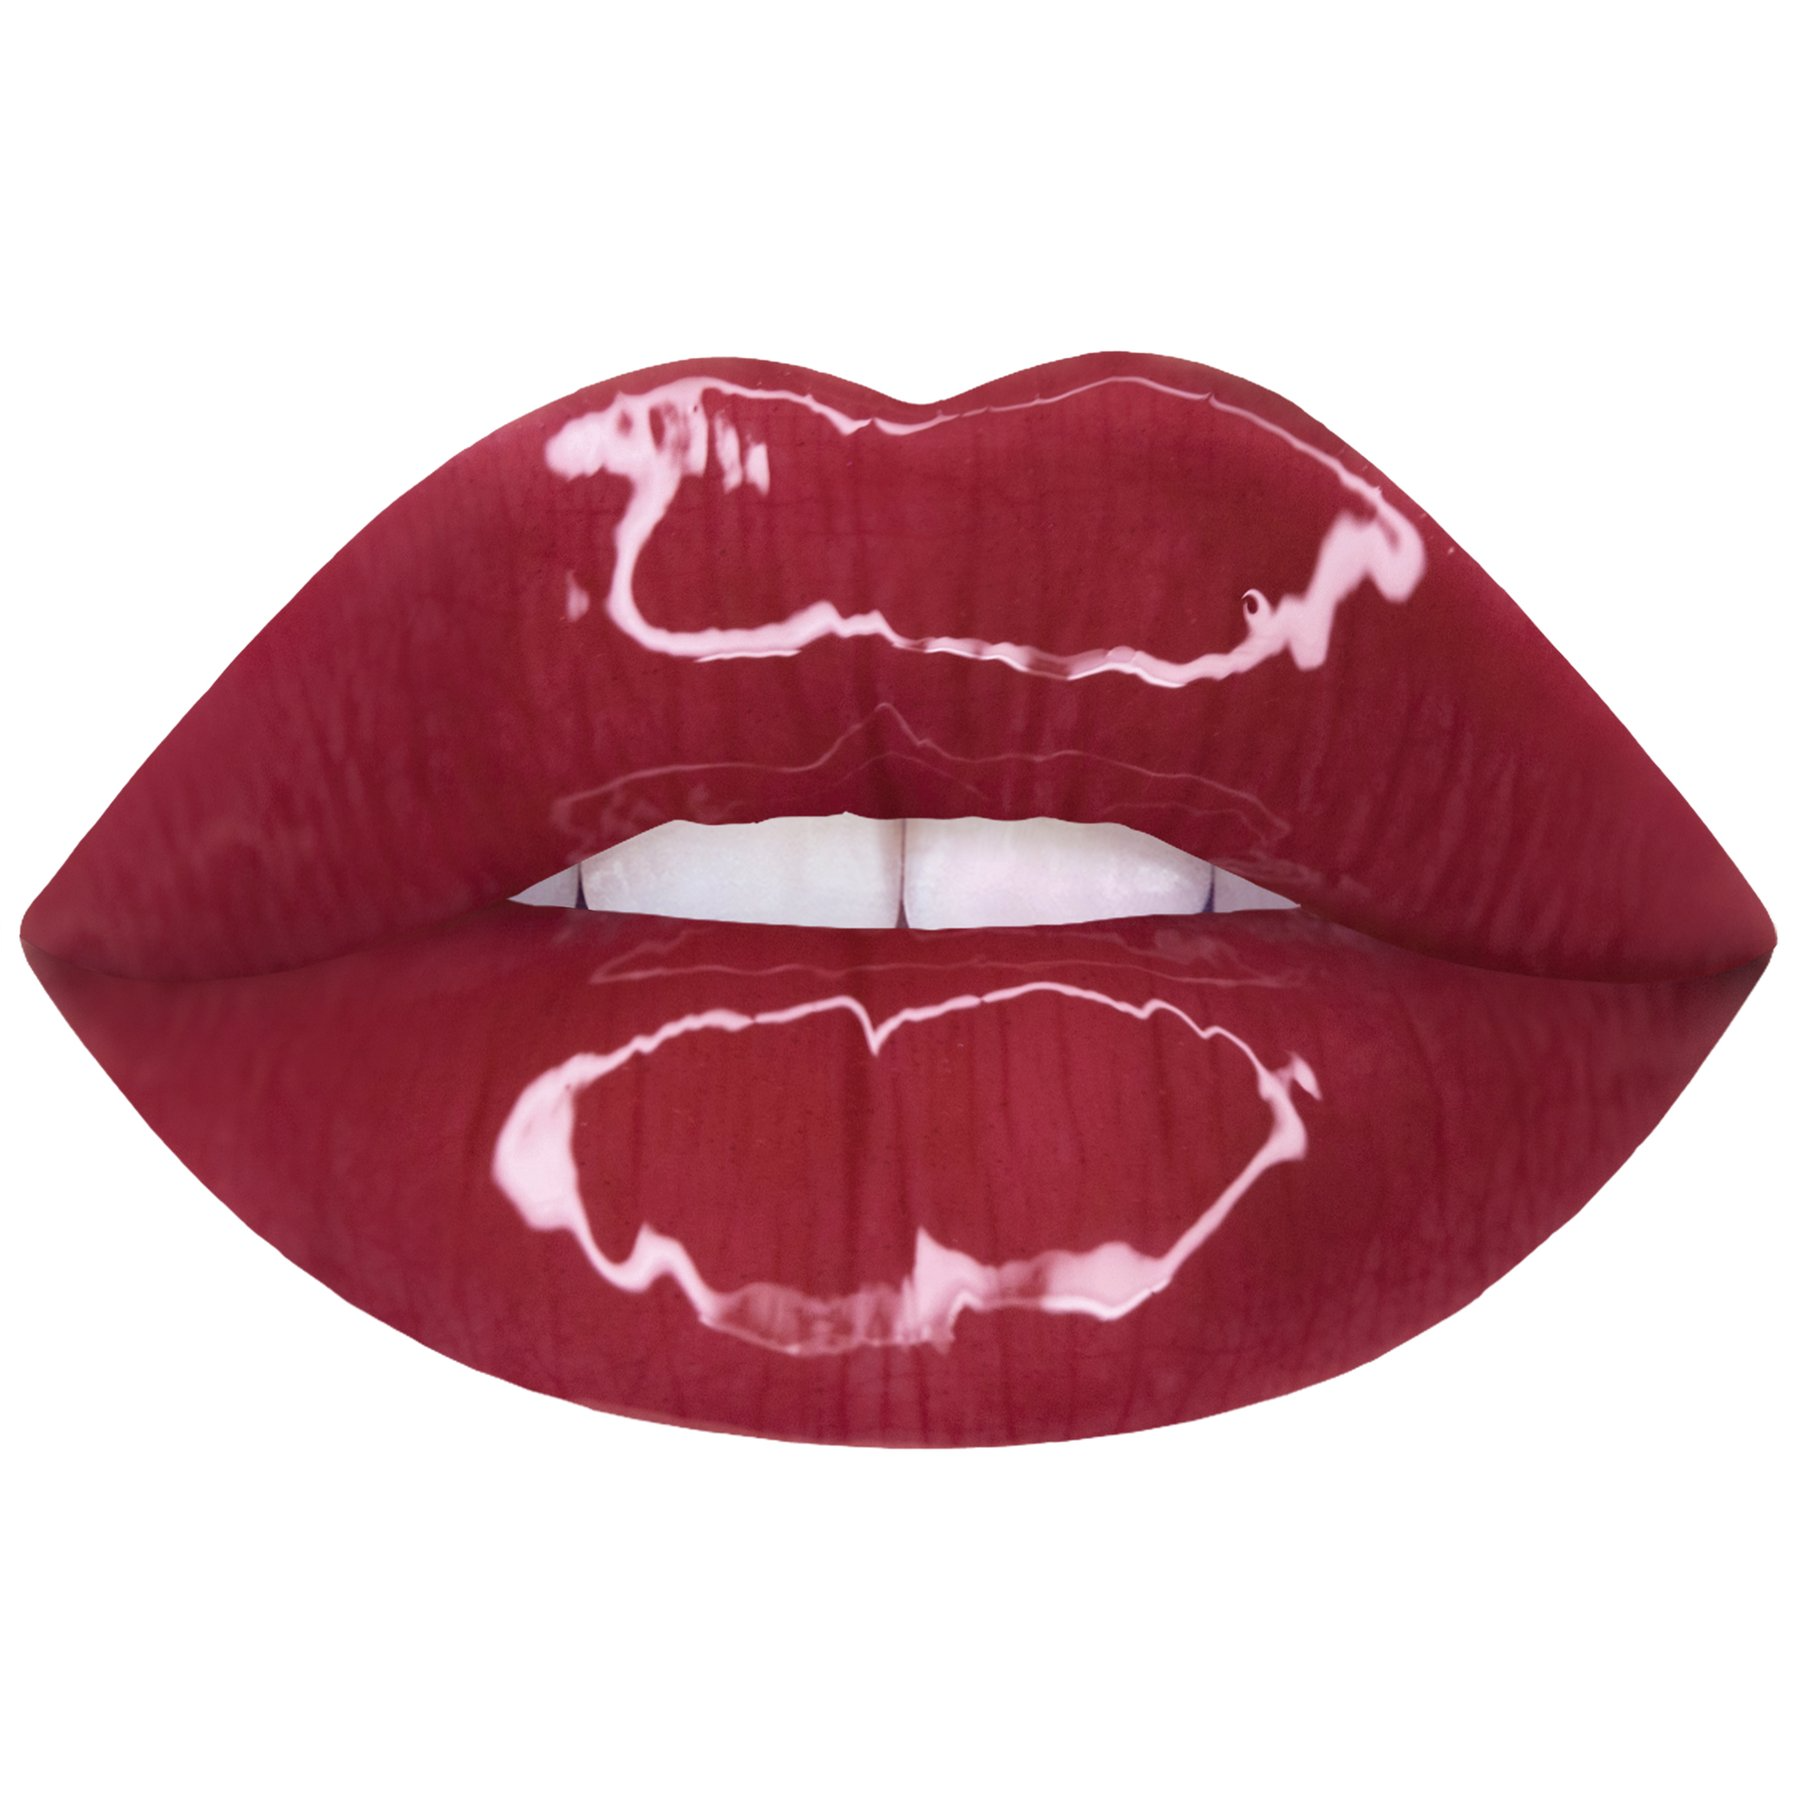 WET CHERRY LIP GLOSS - NudeFace Chile